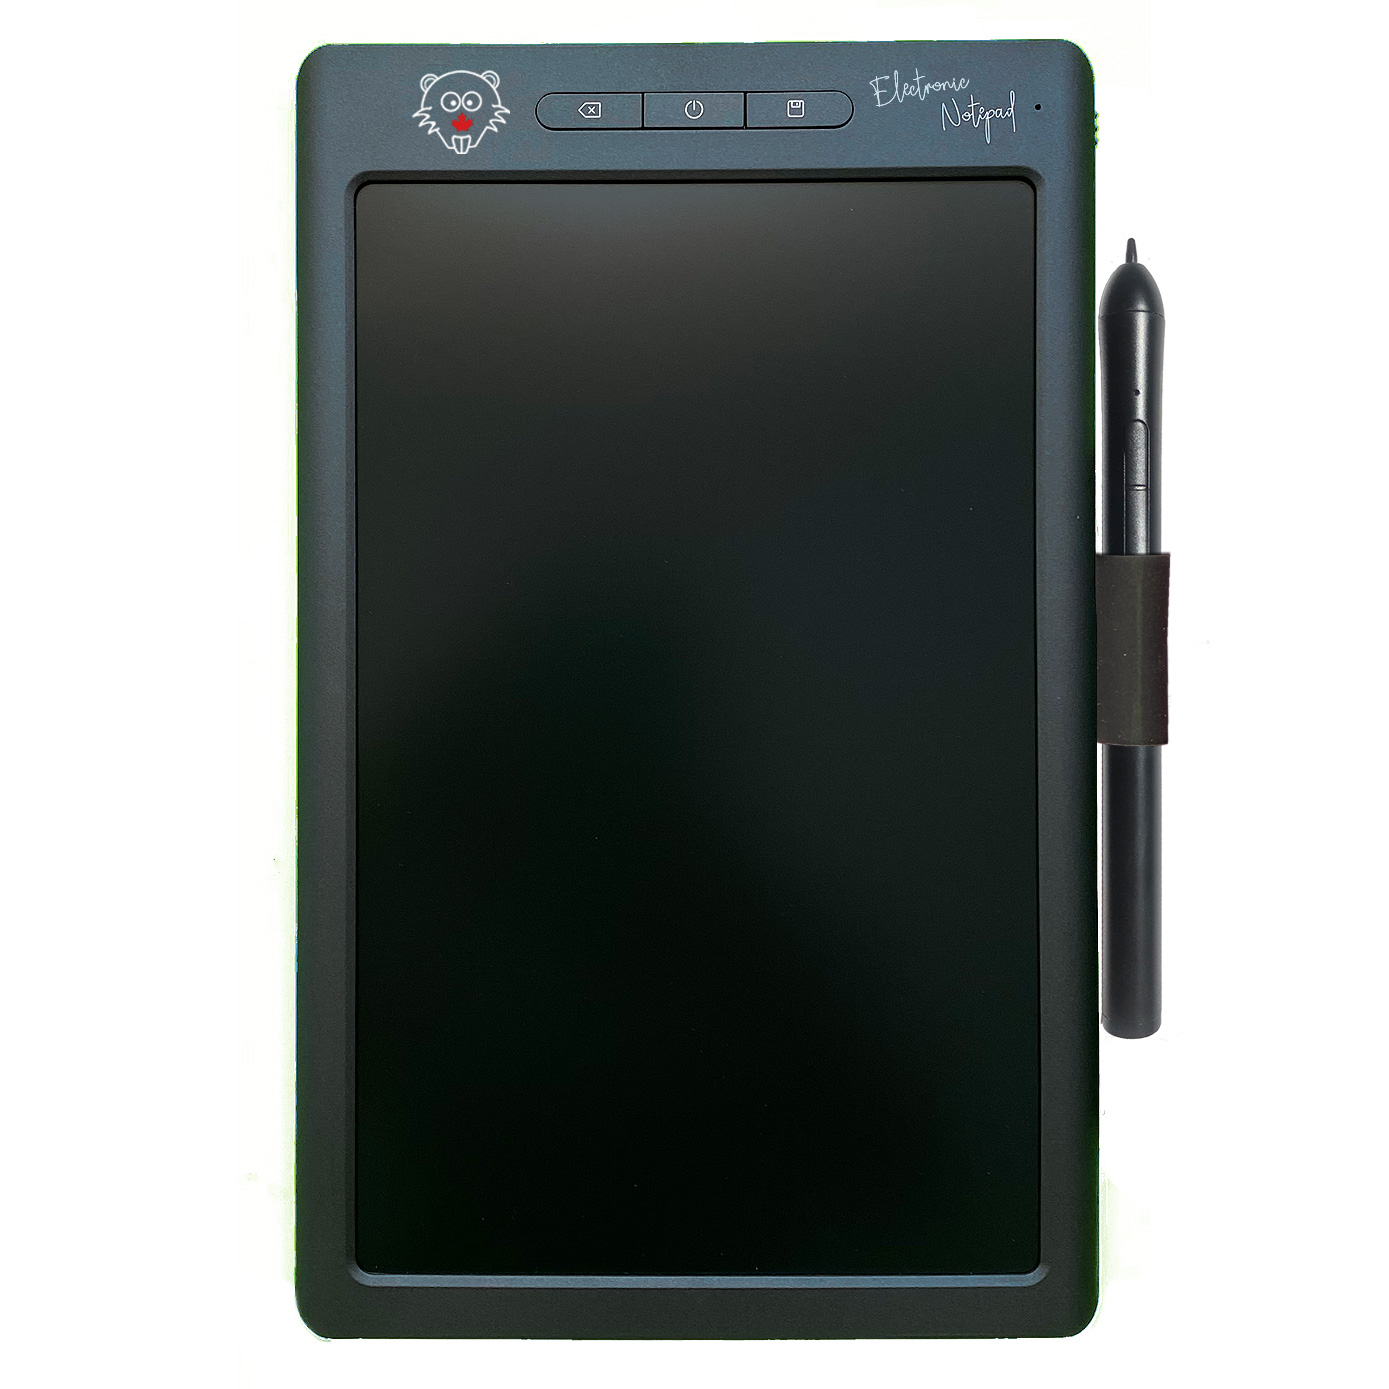 BeaverPad LCD writing tablet (ewriter) with save function